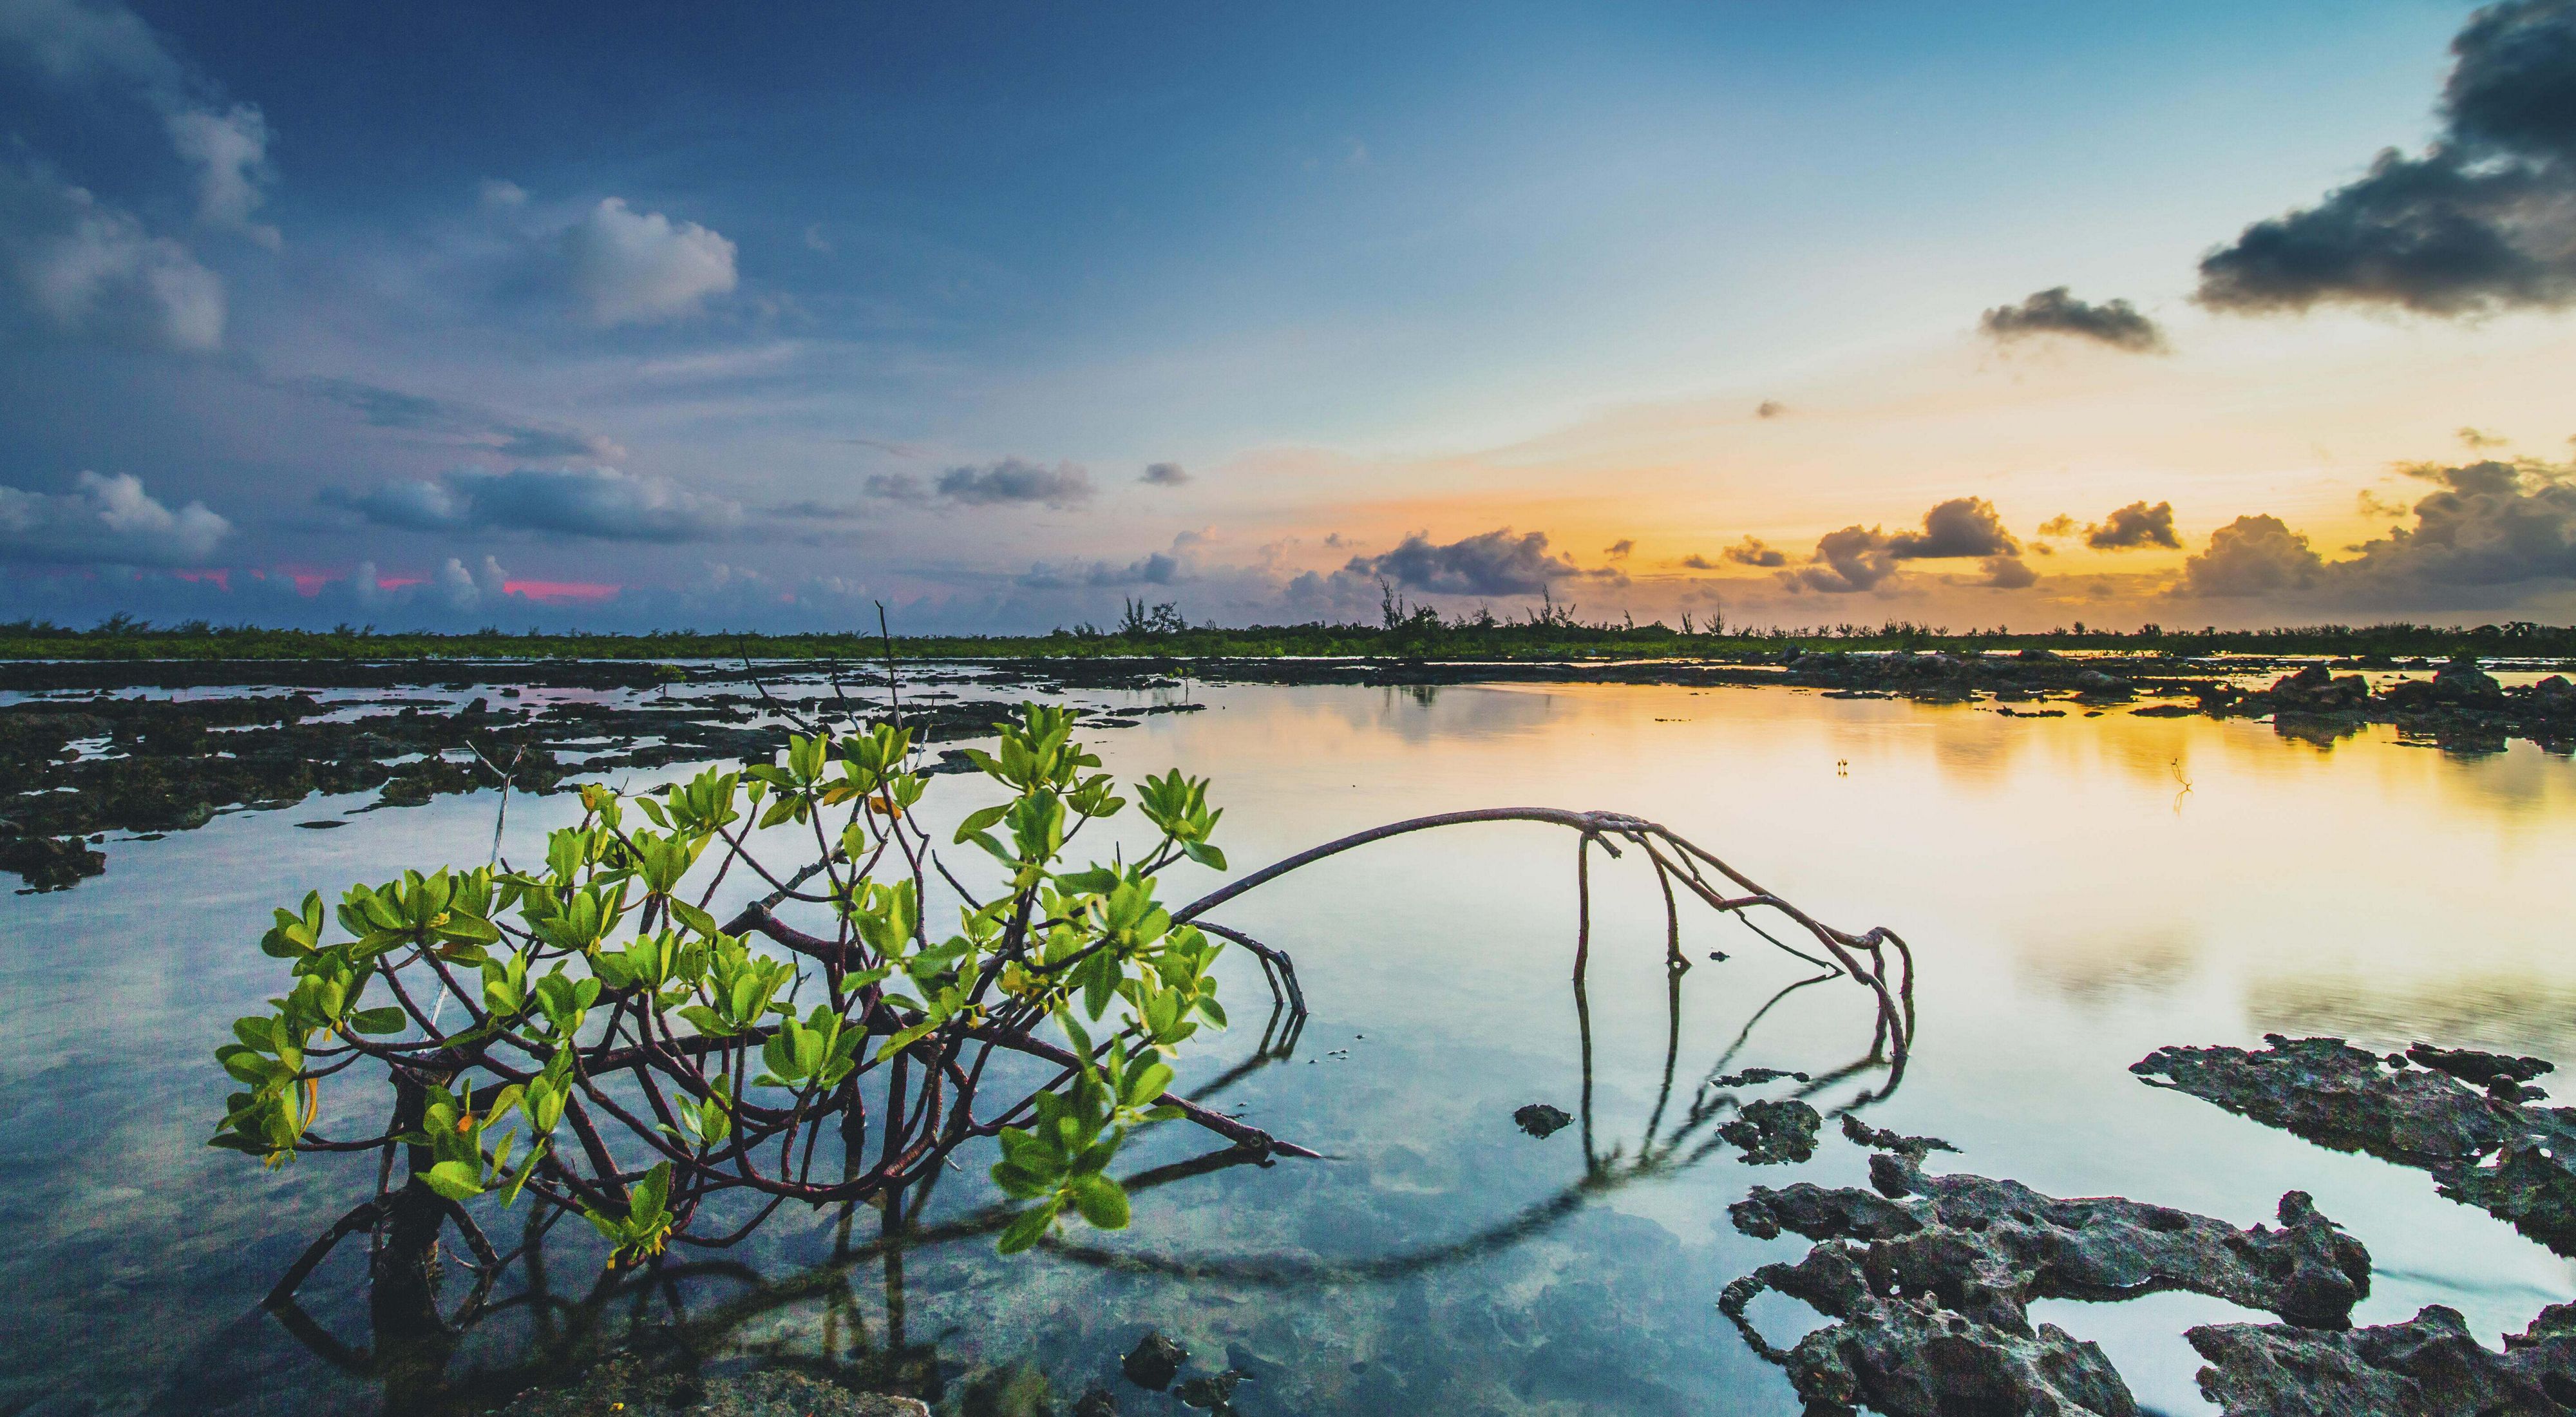 A drooping mangrove tree with branches just above the surface of a tidal pool boasts green leaves